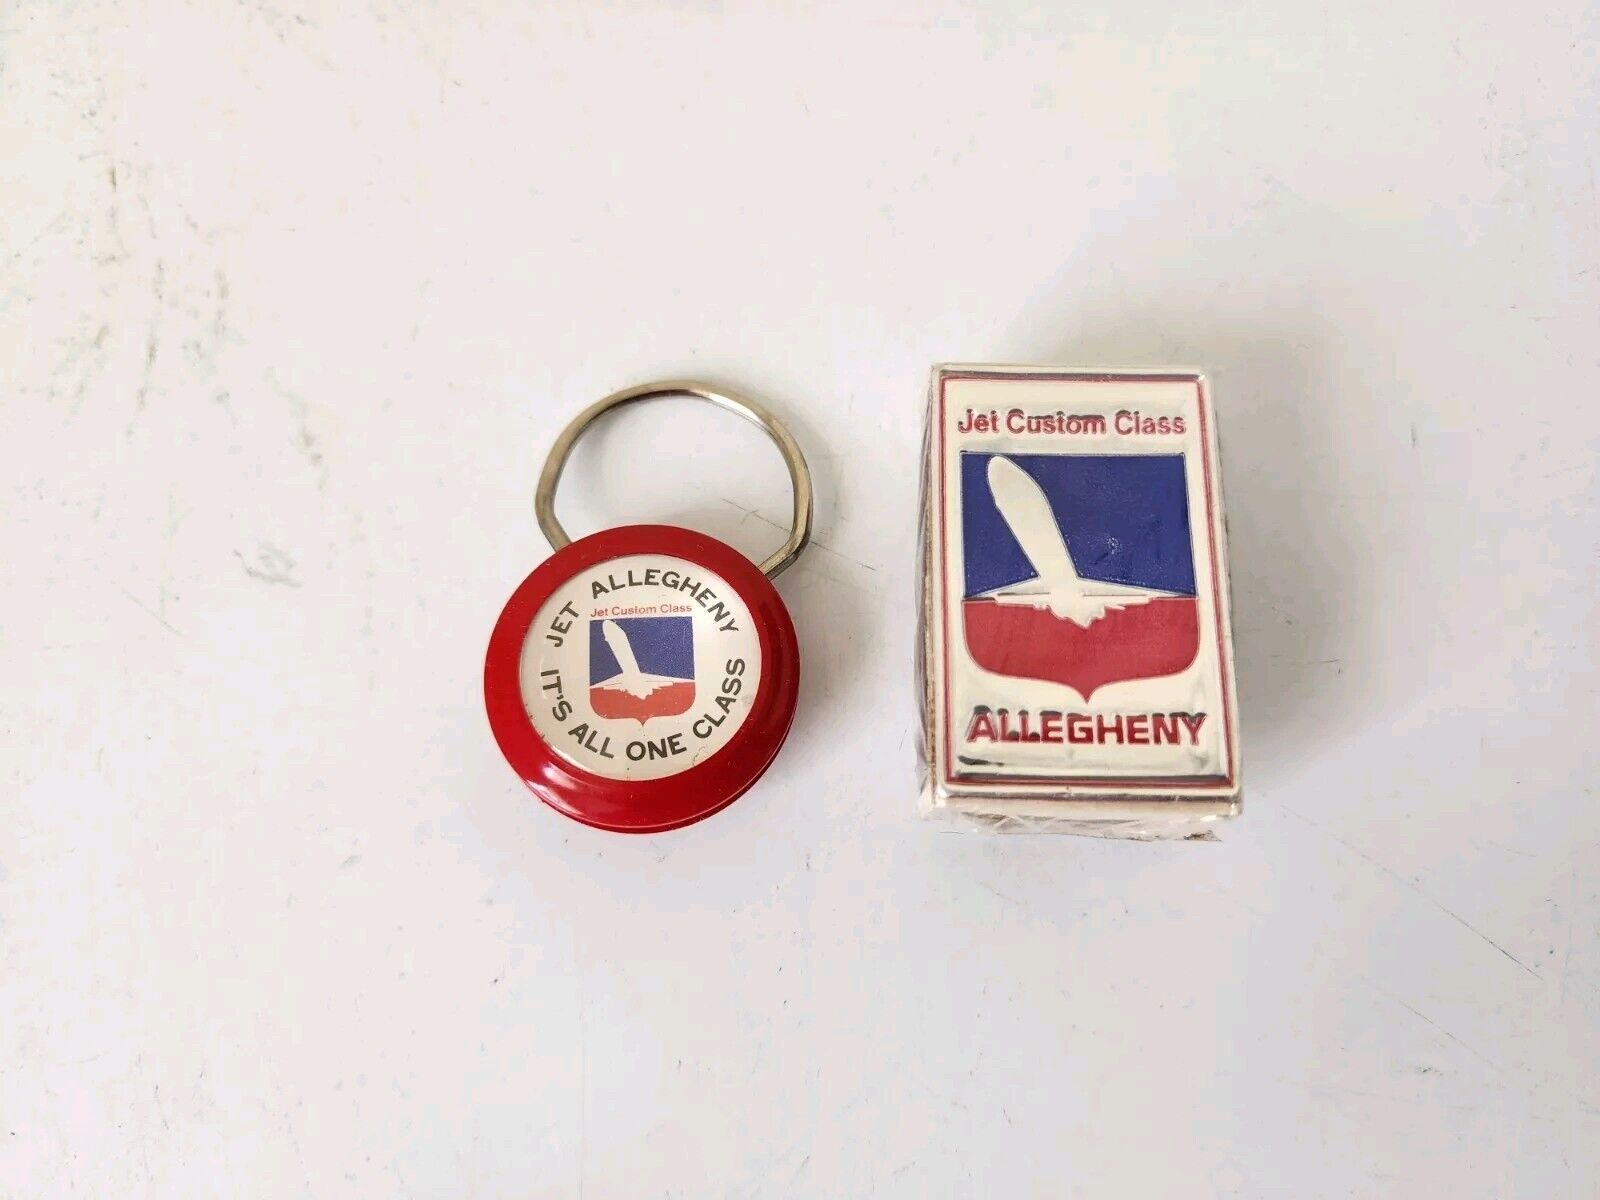 Allegheny Airlines USAIR Defunct Jet Custom Class Matches Snap Keyring Vintage